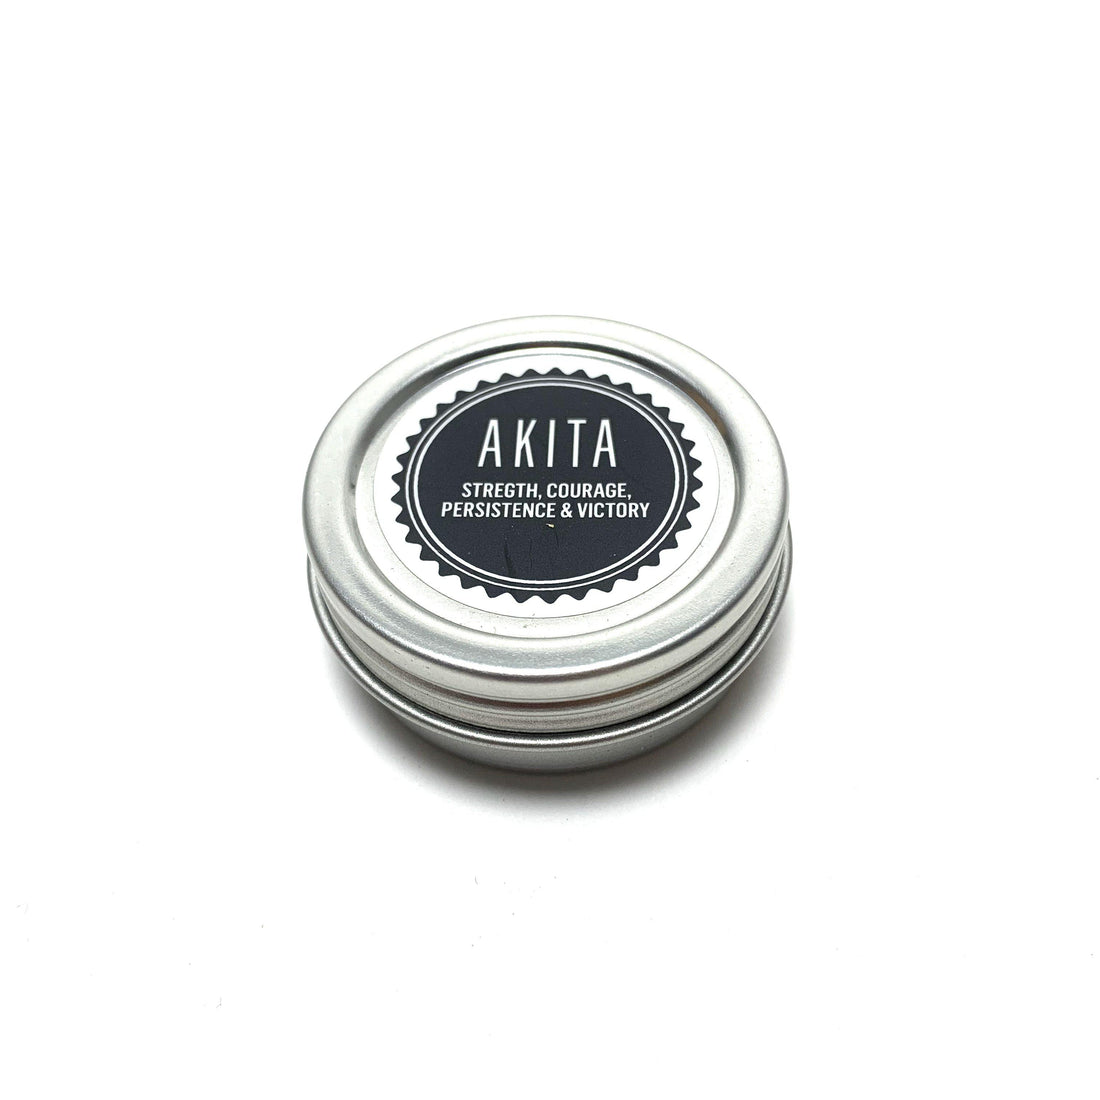 Akita Incense Blend HOI Incense Blend House of Intuition $6.00 Tiny Tin .5 oz 